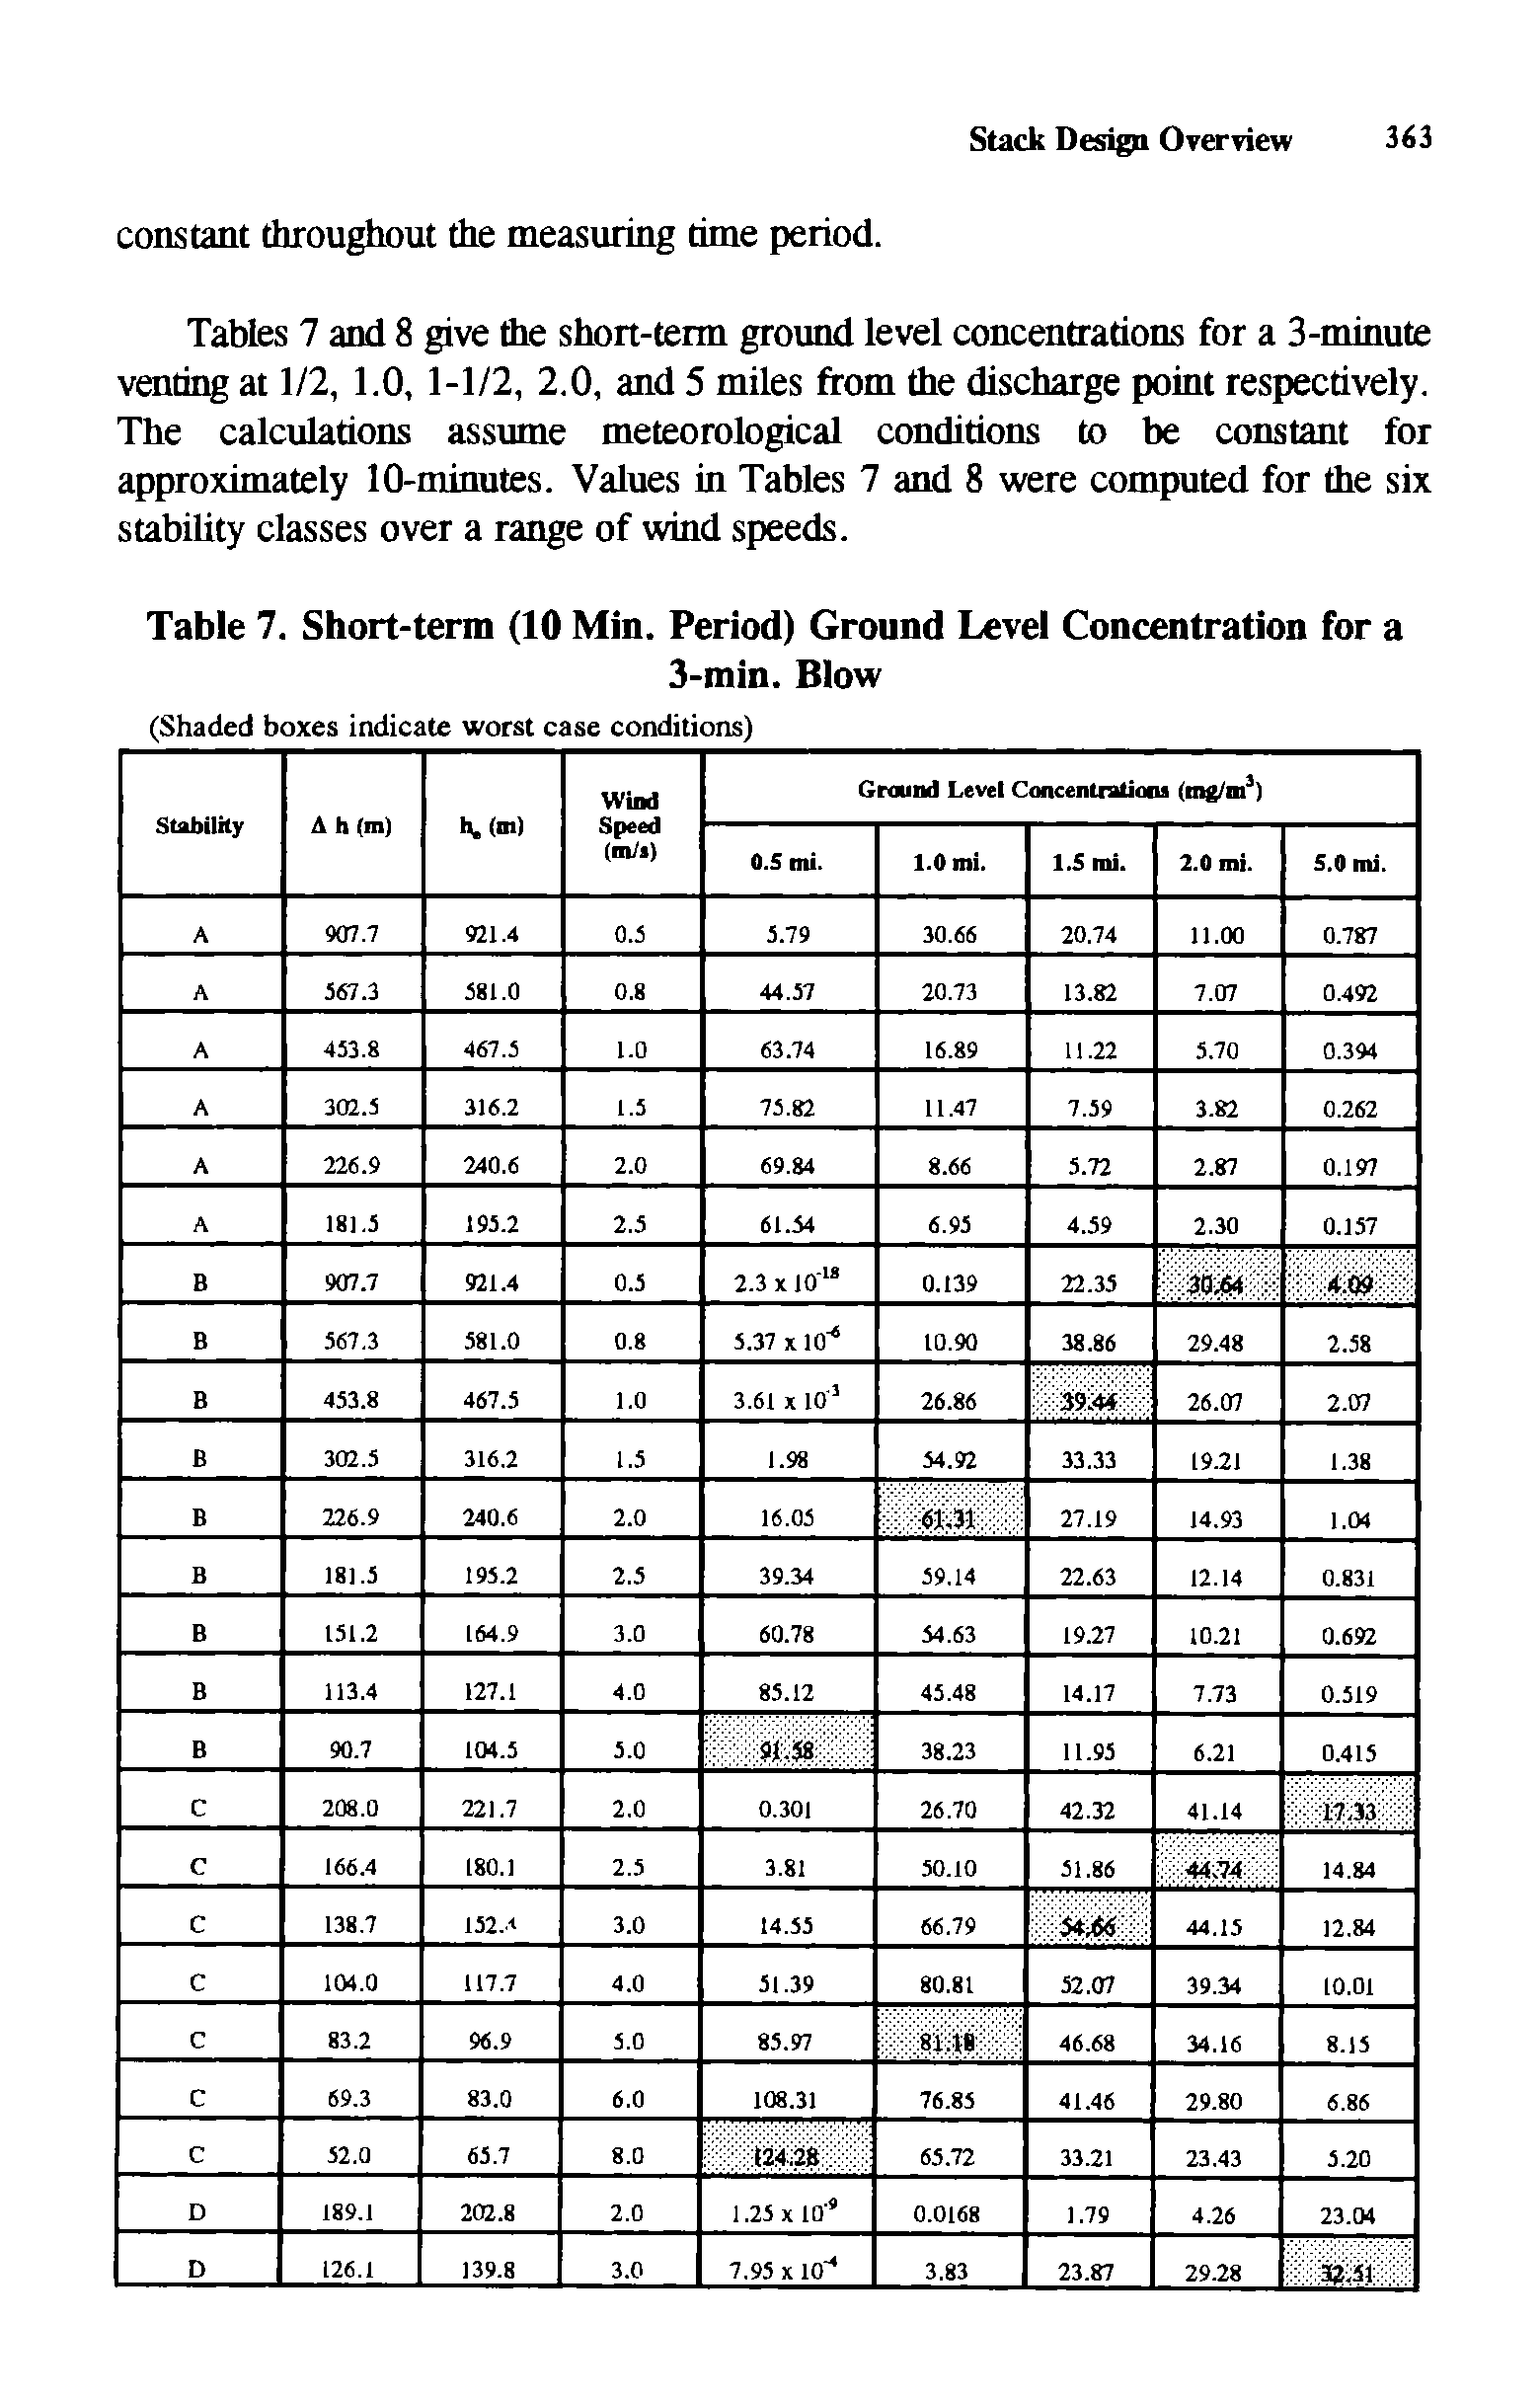 Tables 7 and 8 give the short-term ground level concentrations for a 3-minute venting at 1/2, 1.0, 1-1/2, 2.0, and 5 miles from the discharge point respectively. The calculations assume meteorological conditions to be constant for approximately 10-minutes. Values in Tables 7 and 8 were computed for the six stability classes over a range of wind speeds.